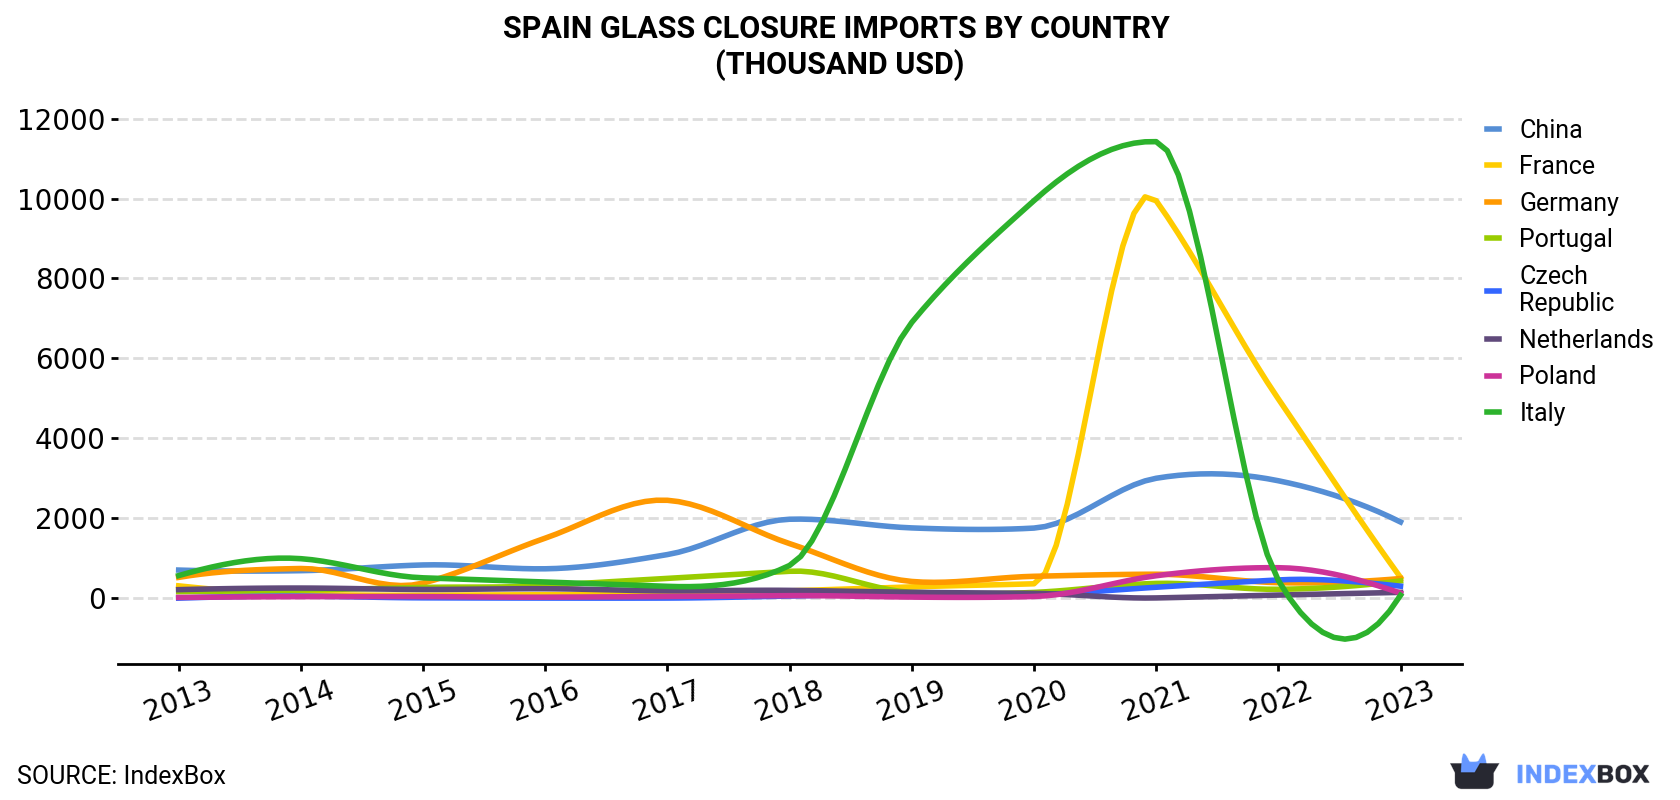 Spain Glass Closure Imports By Country (Thousand USD)